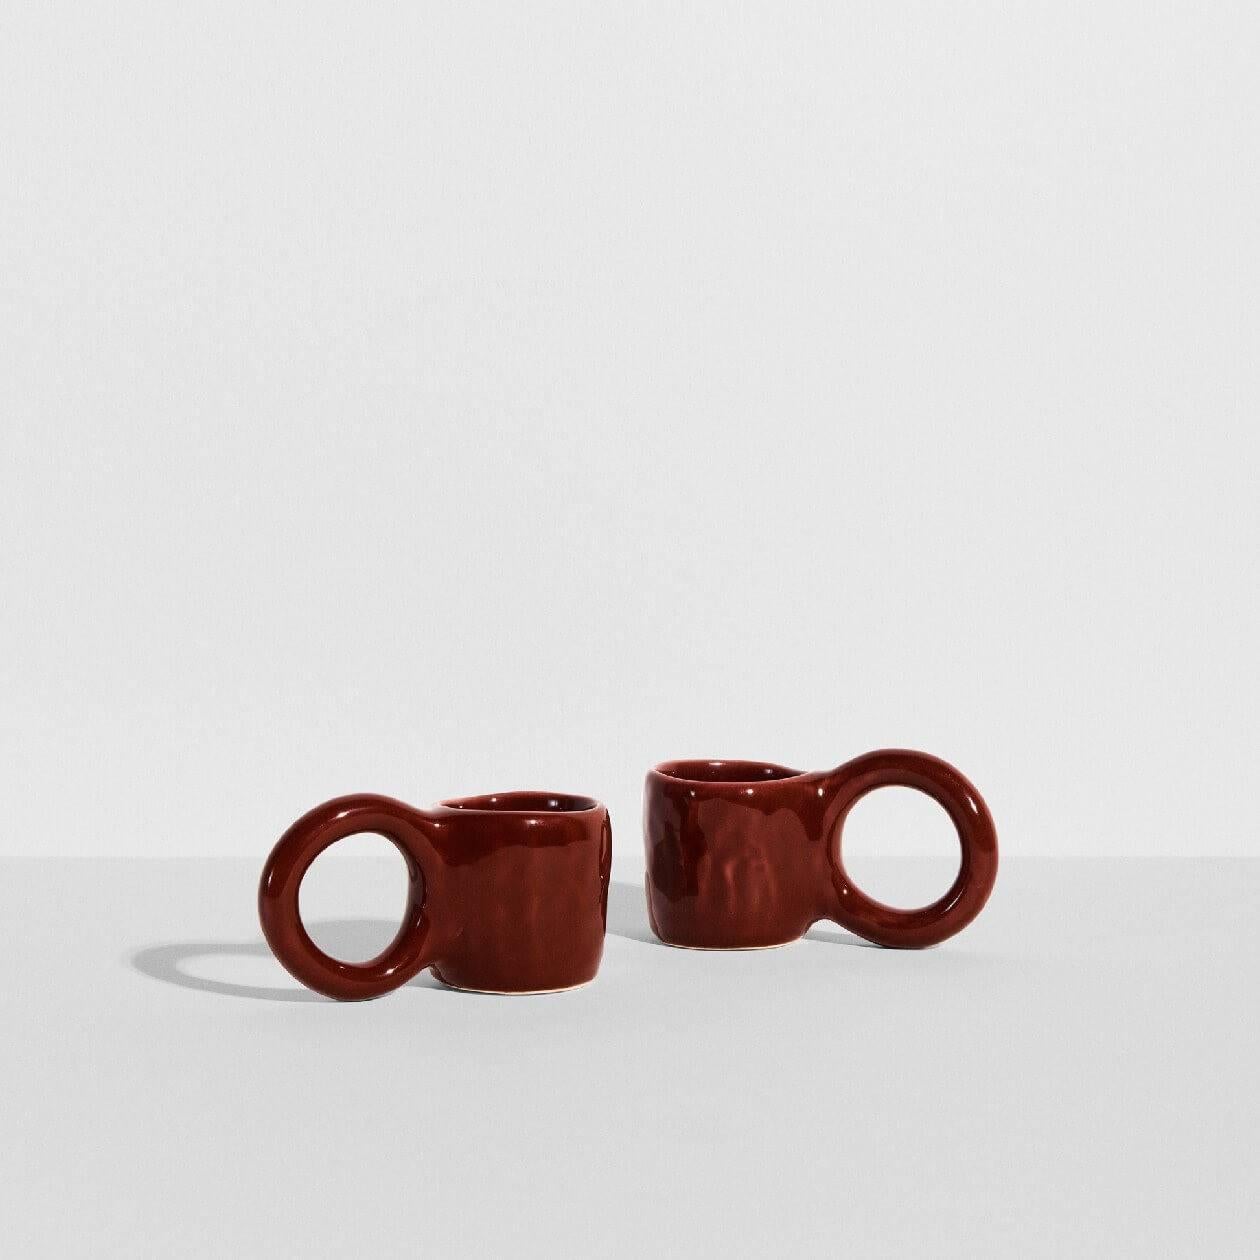 In creating the Donut collection, designer Pia Chevalier drew her inspiration from the world of baking. The ceramic artist designs her espresso like pastries, where the cup handles mimic doughnut pastry, and the enamel finish renders a sugar-glazed